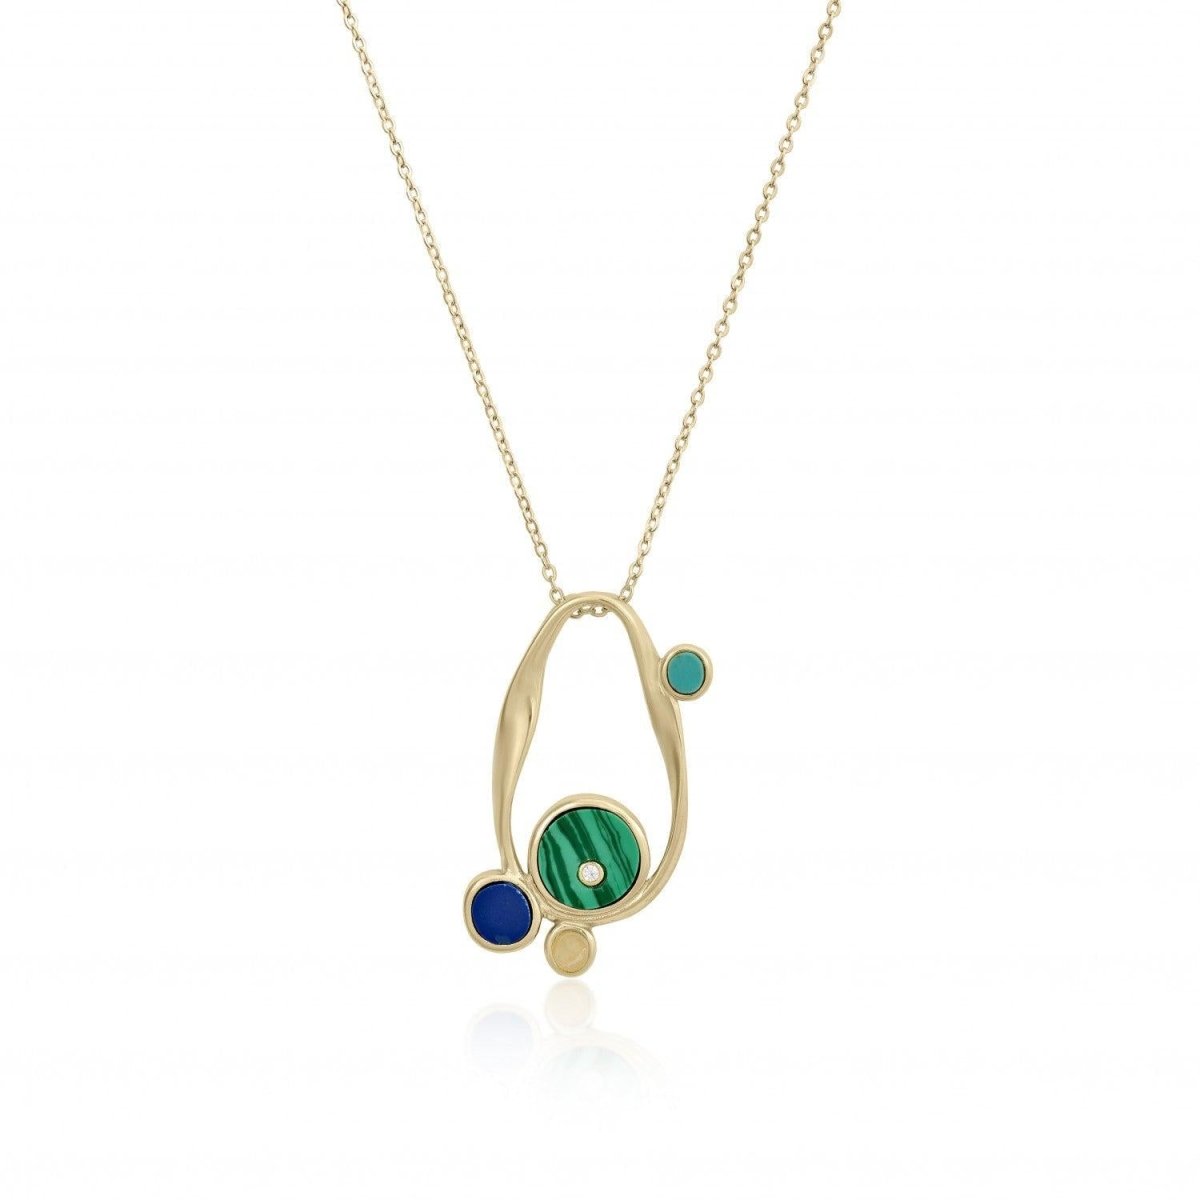 Necklace - Necklaces with stones irregular oval golden design